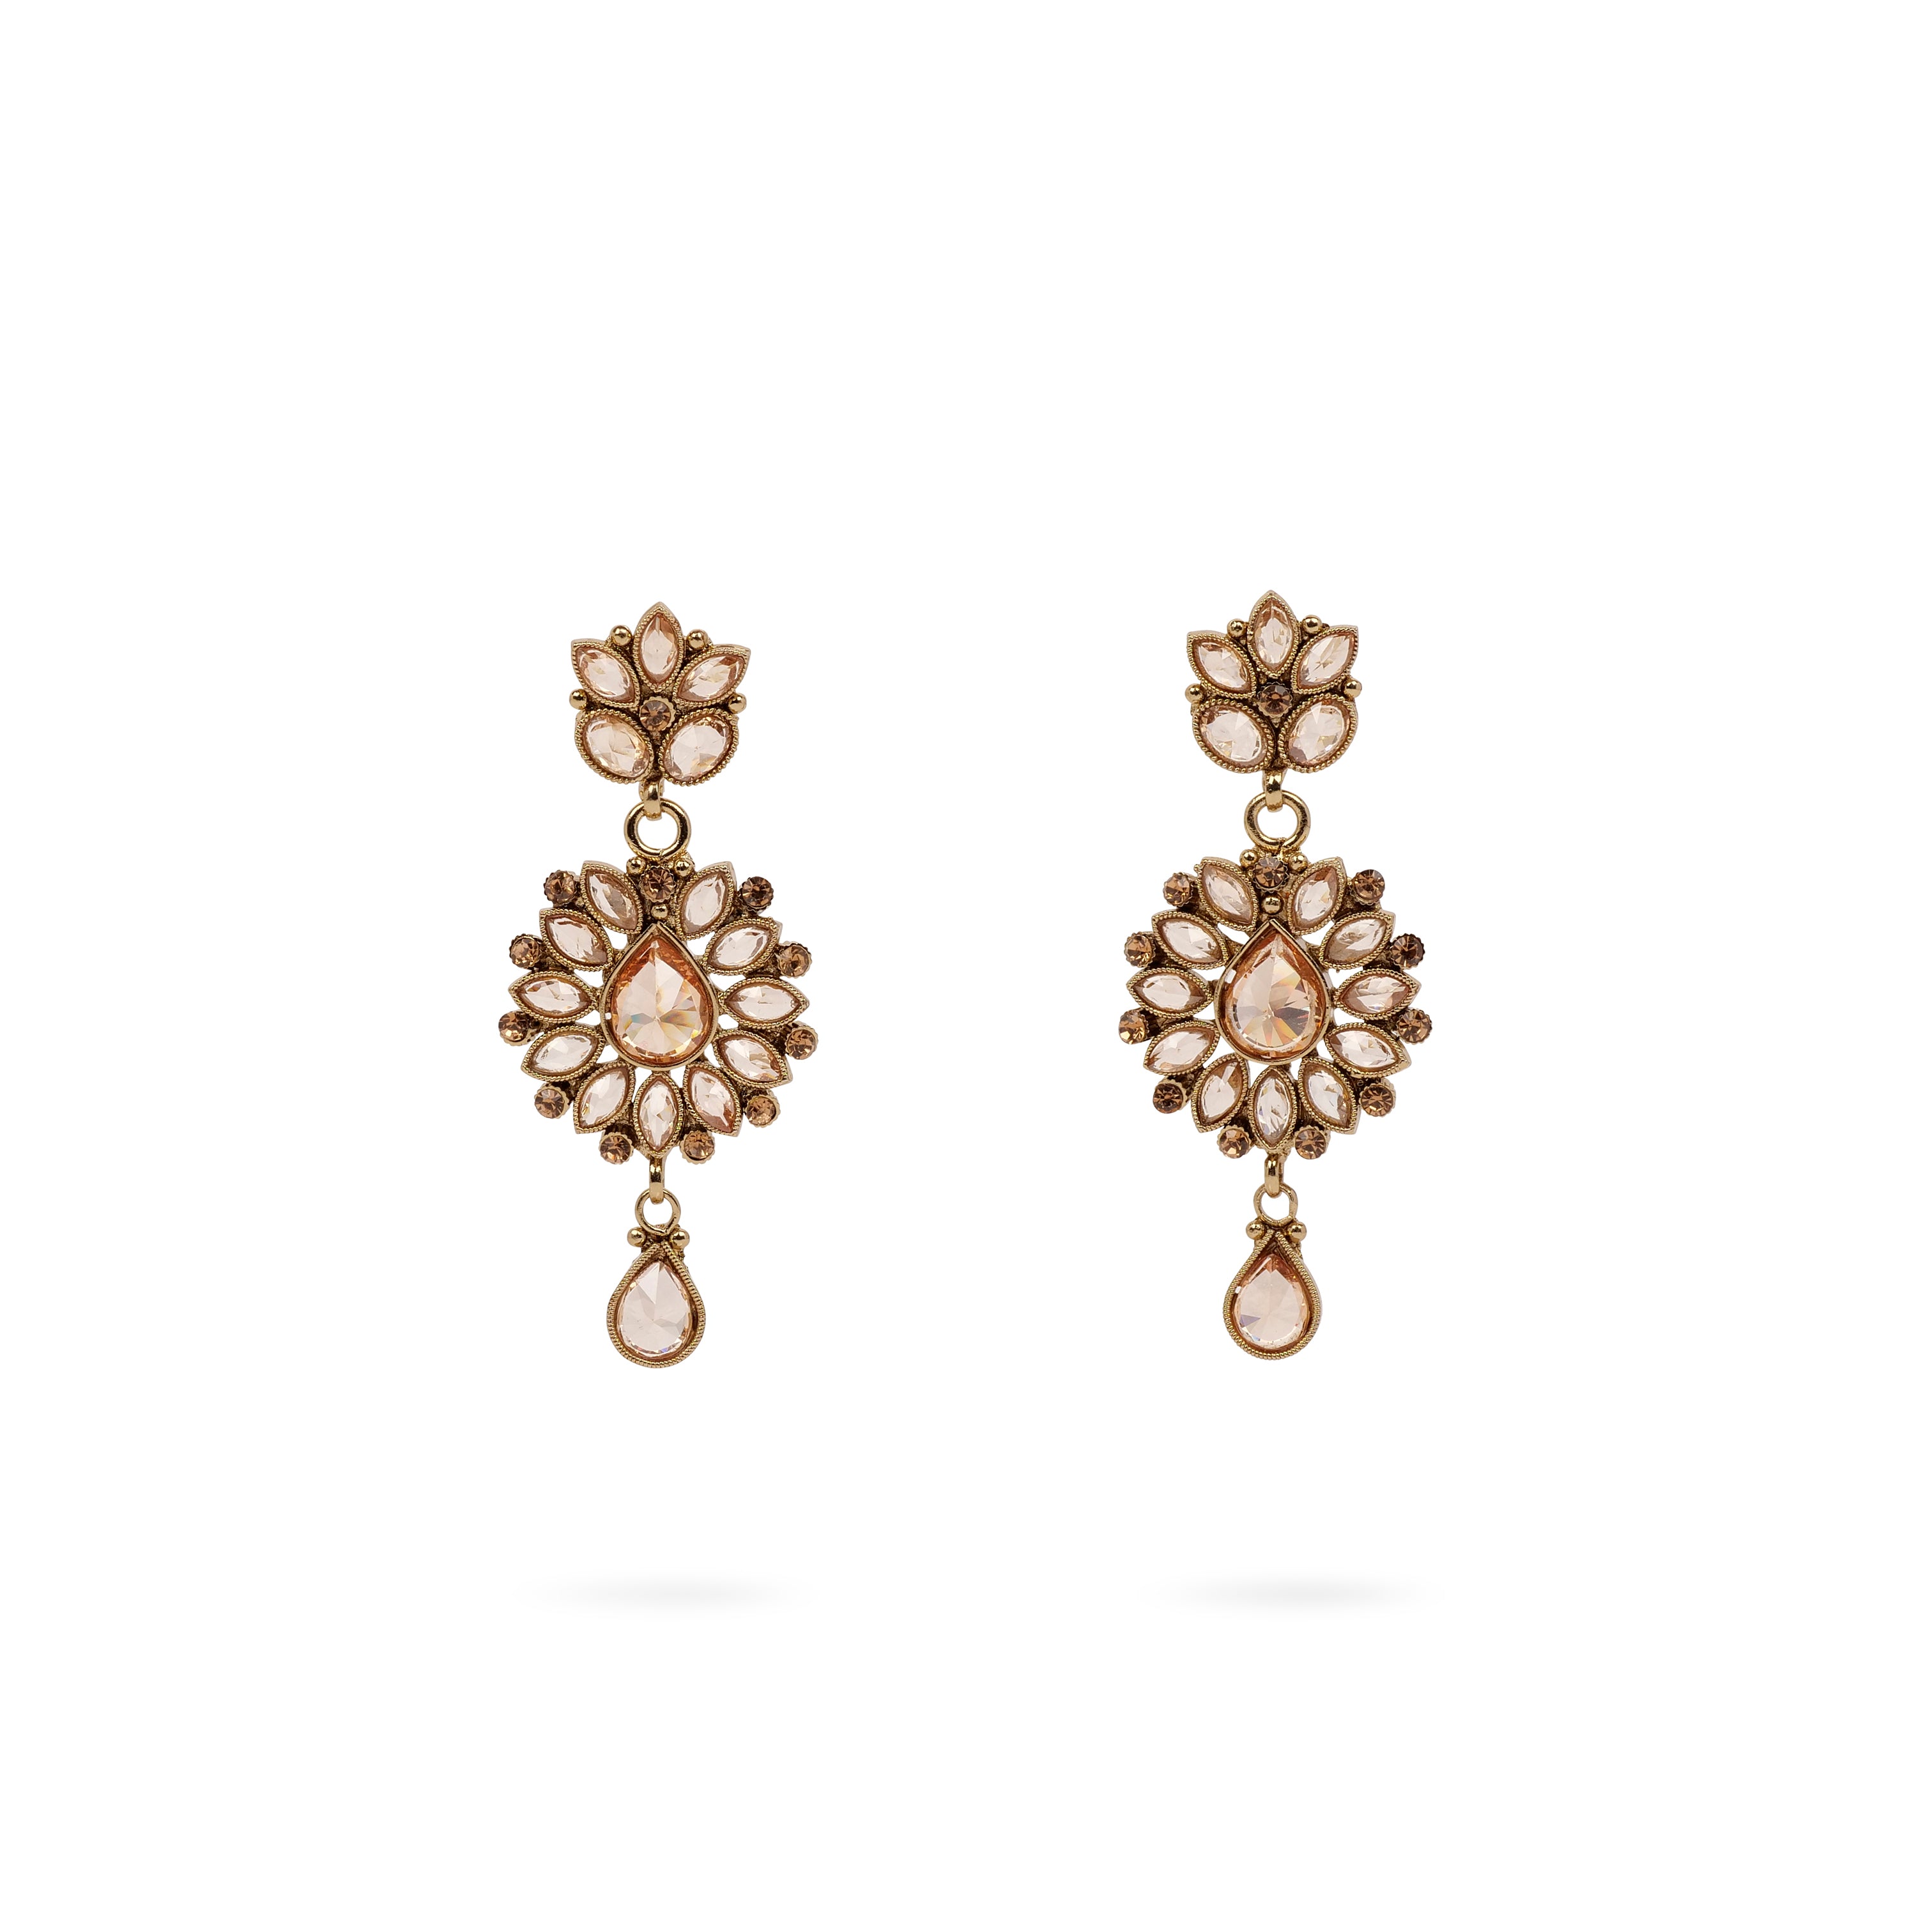 Pear Drop Small Earrings in Antique Gold